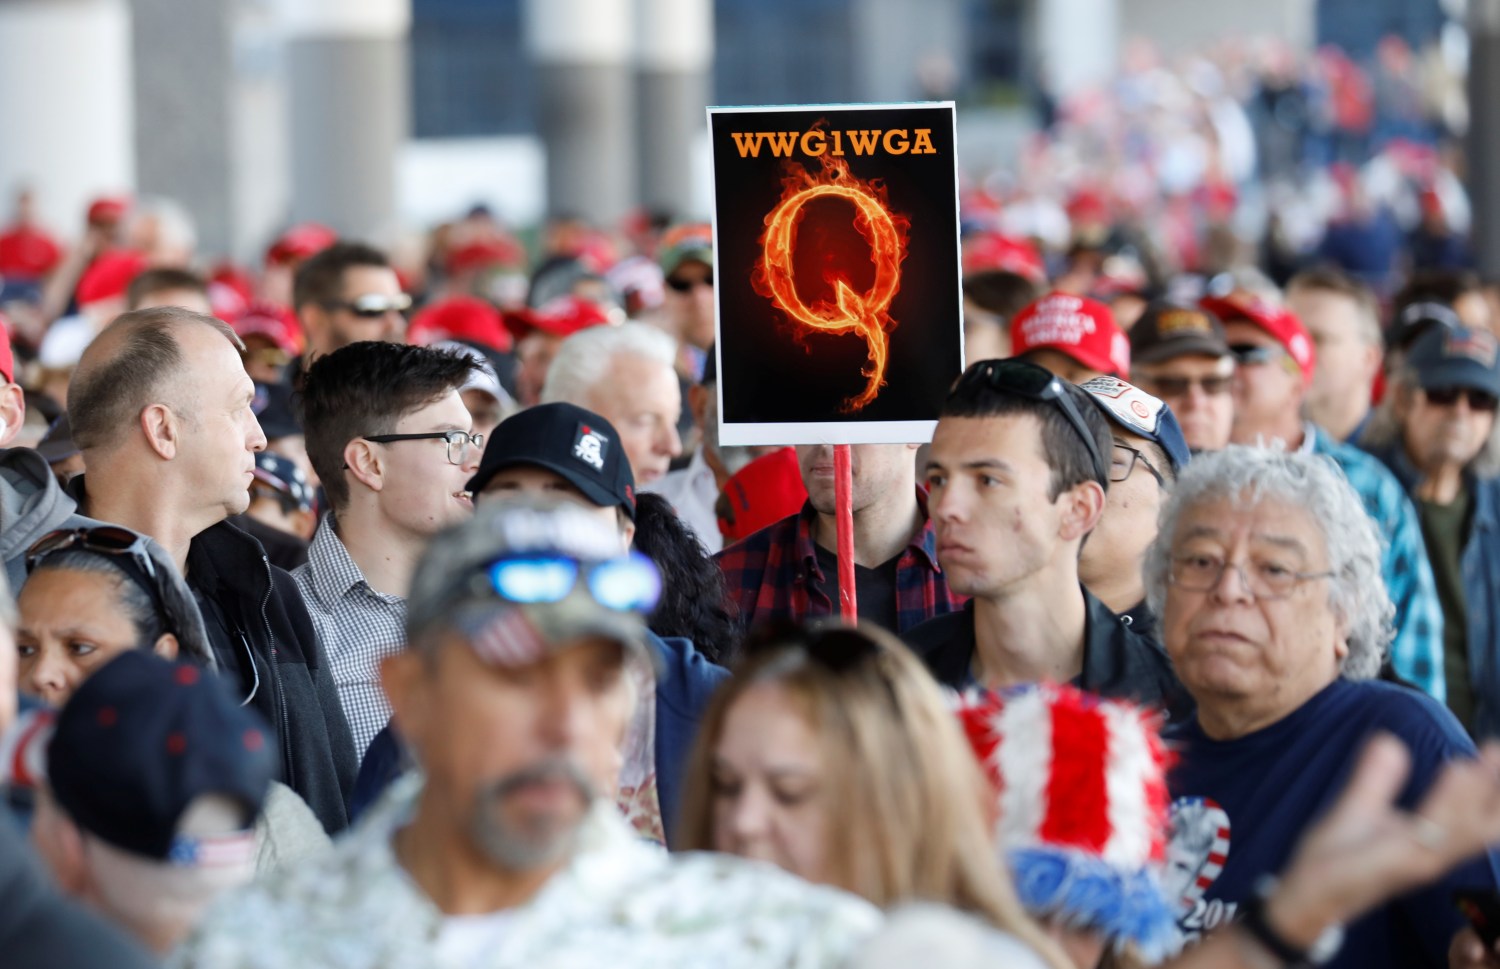 A man in the crowd holds a QAnon sign with the group's abbreviation of their rallying cry "Where we go one, we go all" as crowds gather to attend U.S. President Donald Trump's campaign rally at the Las Vegas Convention Center in Las Vegas, Nevada, U.S., February 21, 2020. REUTERS/Patrick Fallon